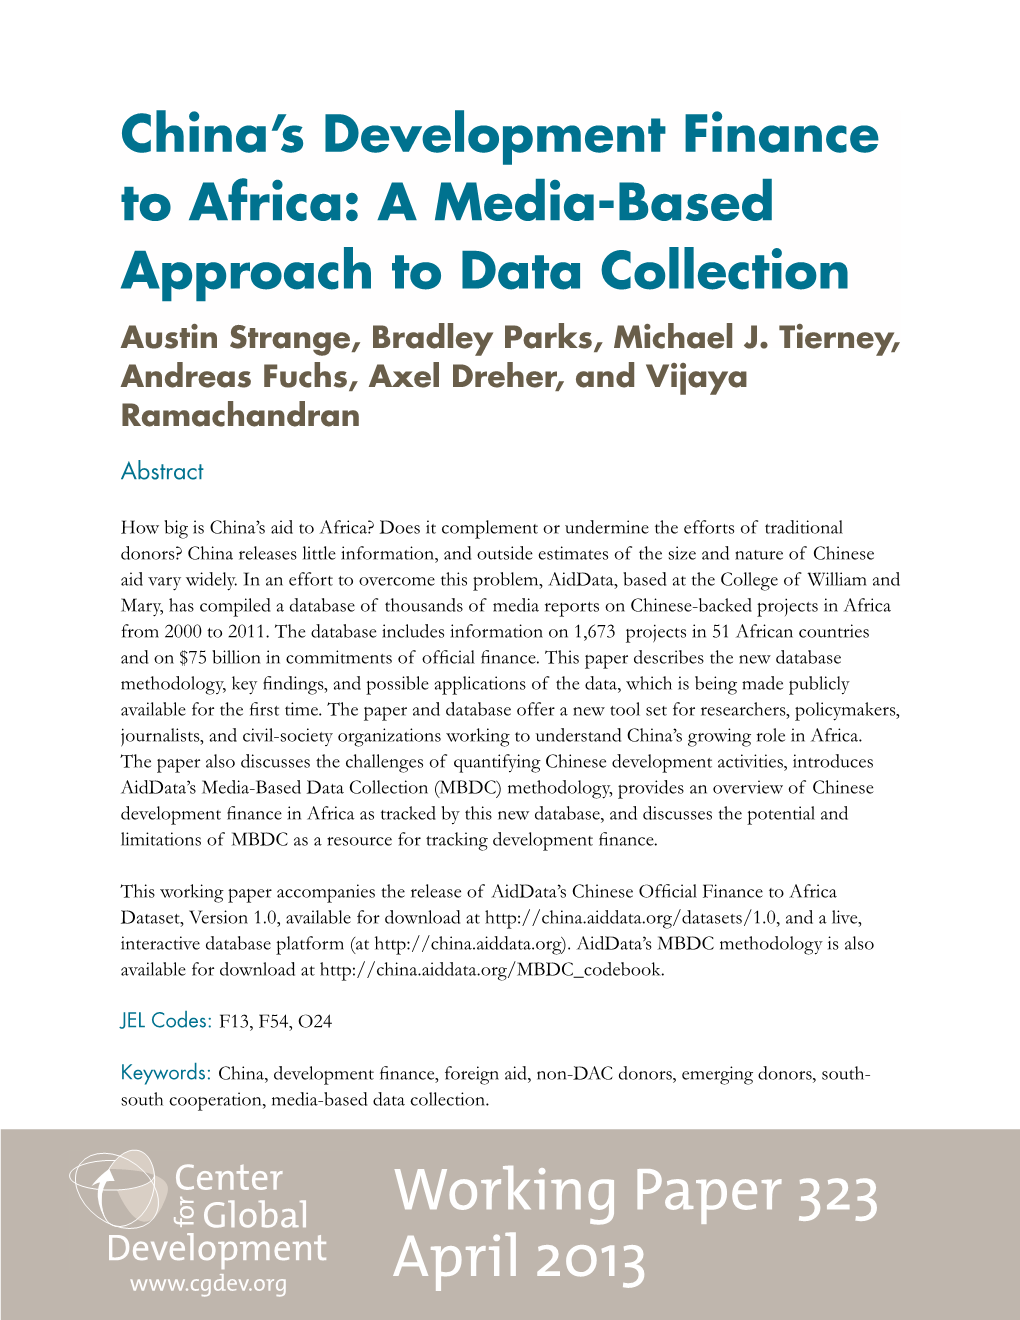 China's Development Finance to Africa: a Media-Based Approach To